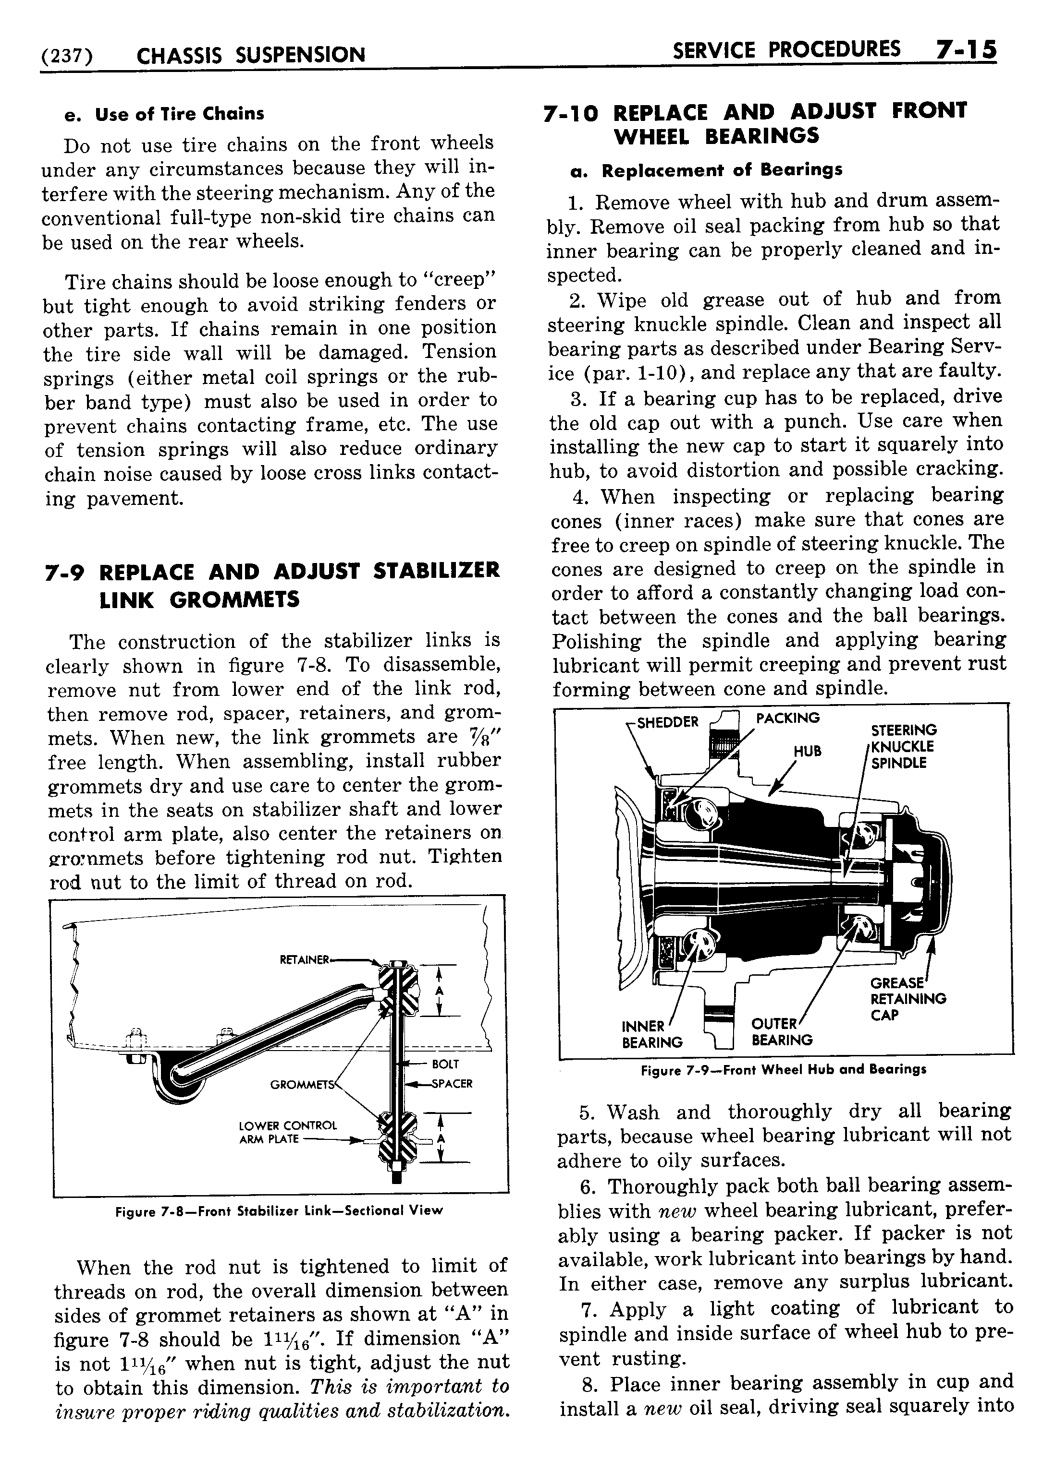 n_08 1955 Buick Shop Manual - Chassis Suspension-015-015.jpg